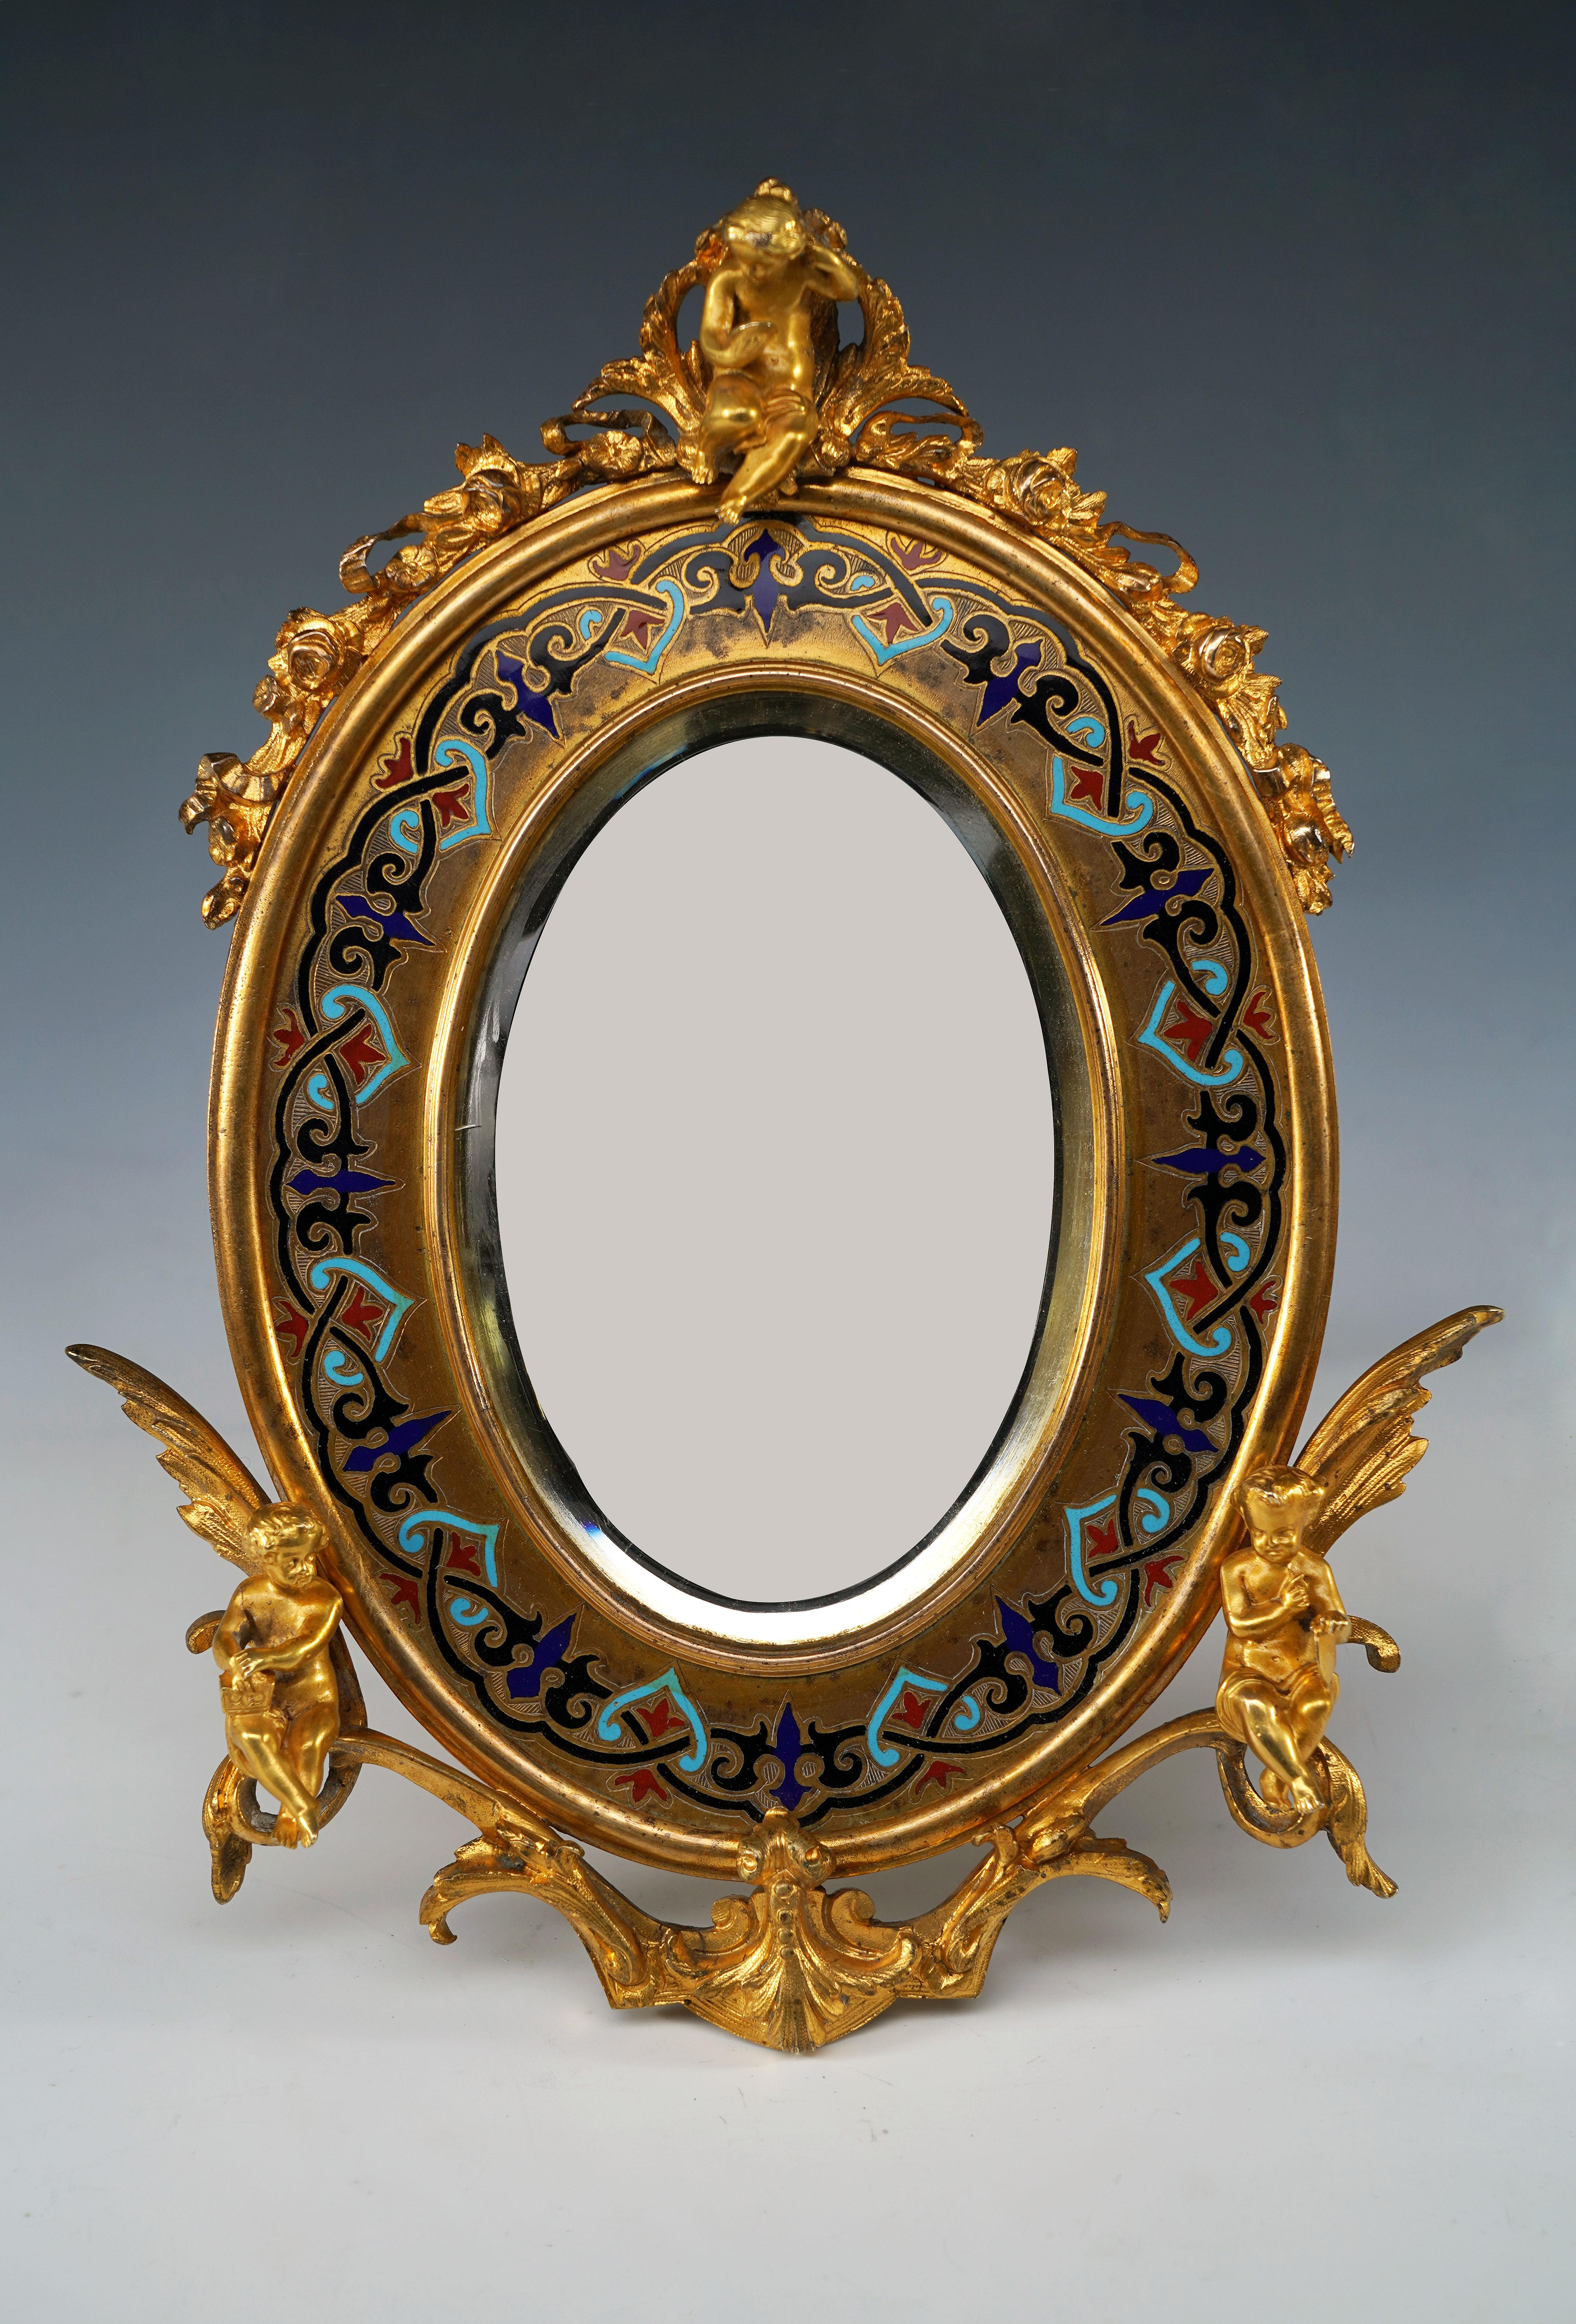 A lovely oval gilded bronze table mirror, adorned with a polychrome “champlevé” enamel decor made of stylized flowers and beautiful gilded bronze mounts with putti, palms and garlands of flowers.

Alphonse Giroux and Company, famous curiosity and